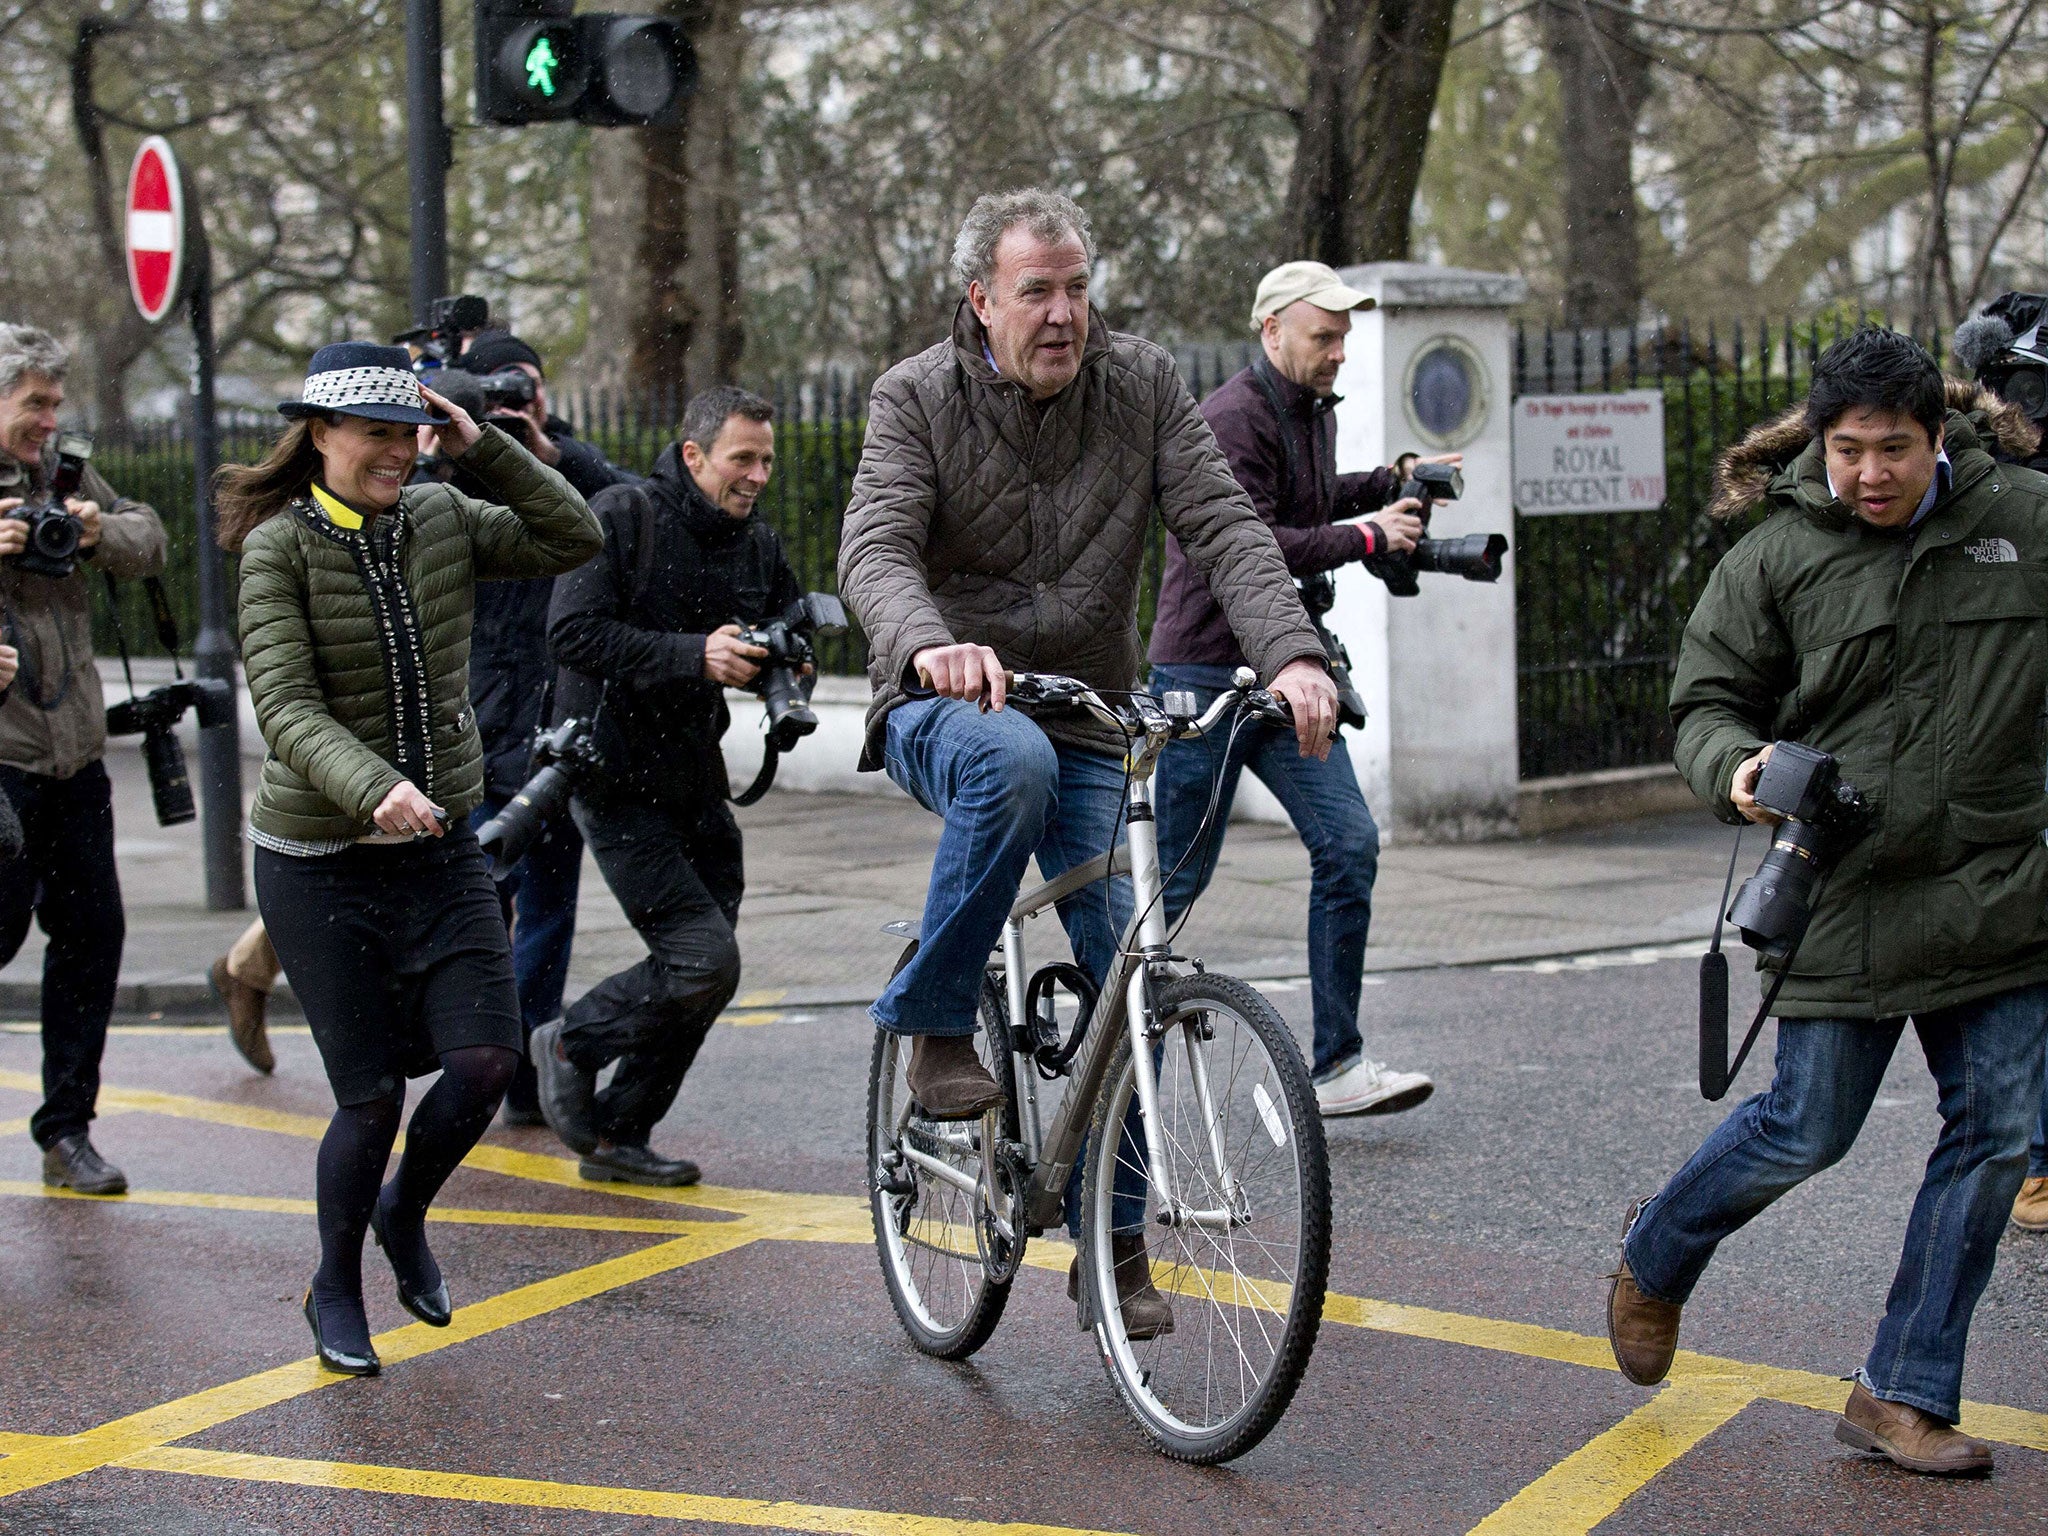 Jeremy Clarkson is surrounded by media personnel as he leaves his home on a bicycle in London